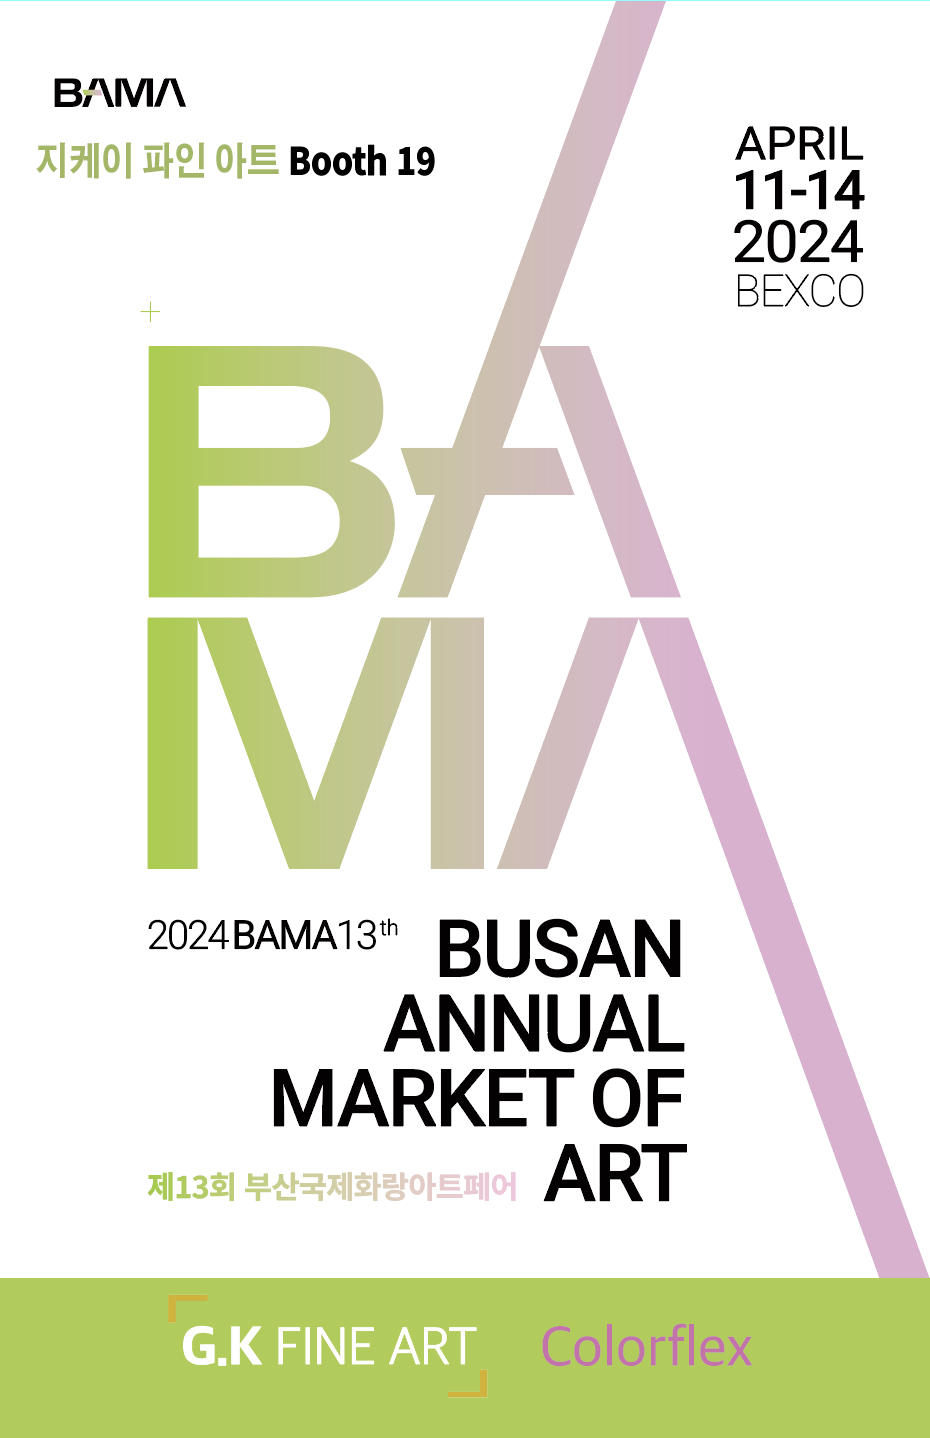 A poster for the 2024 busan annual market of art.